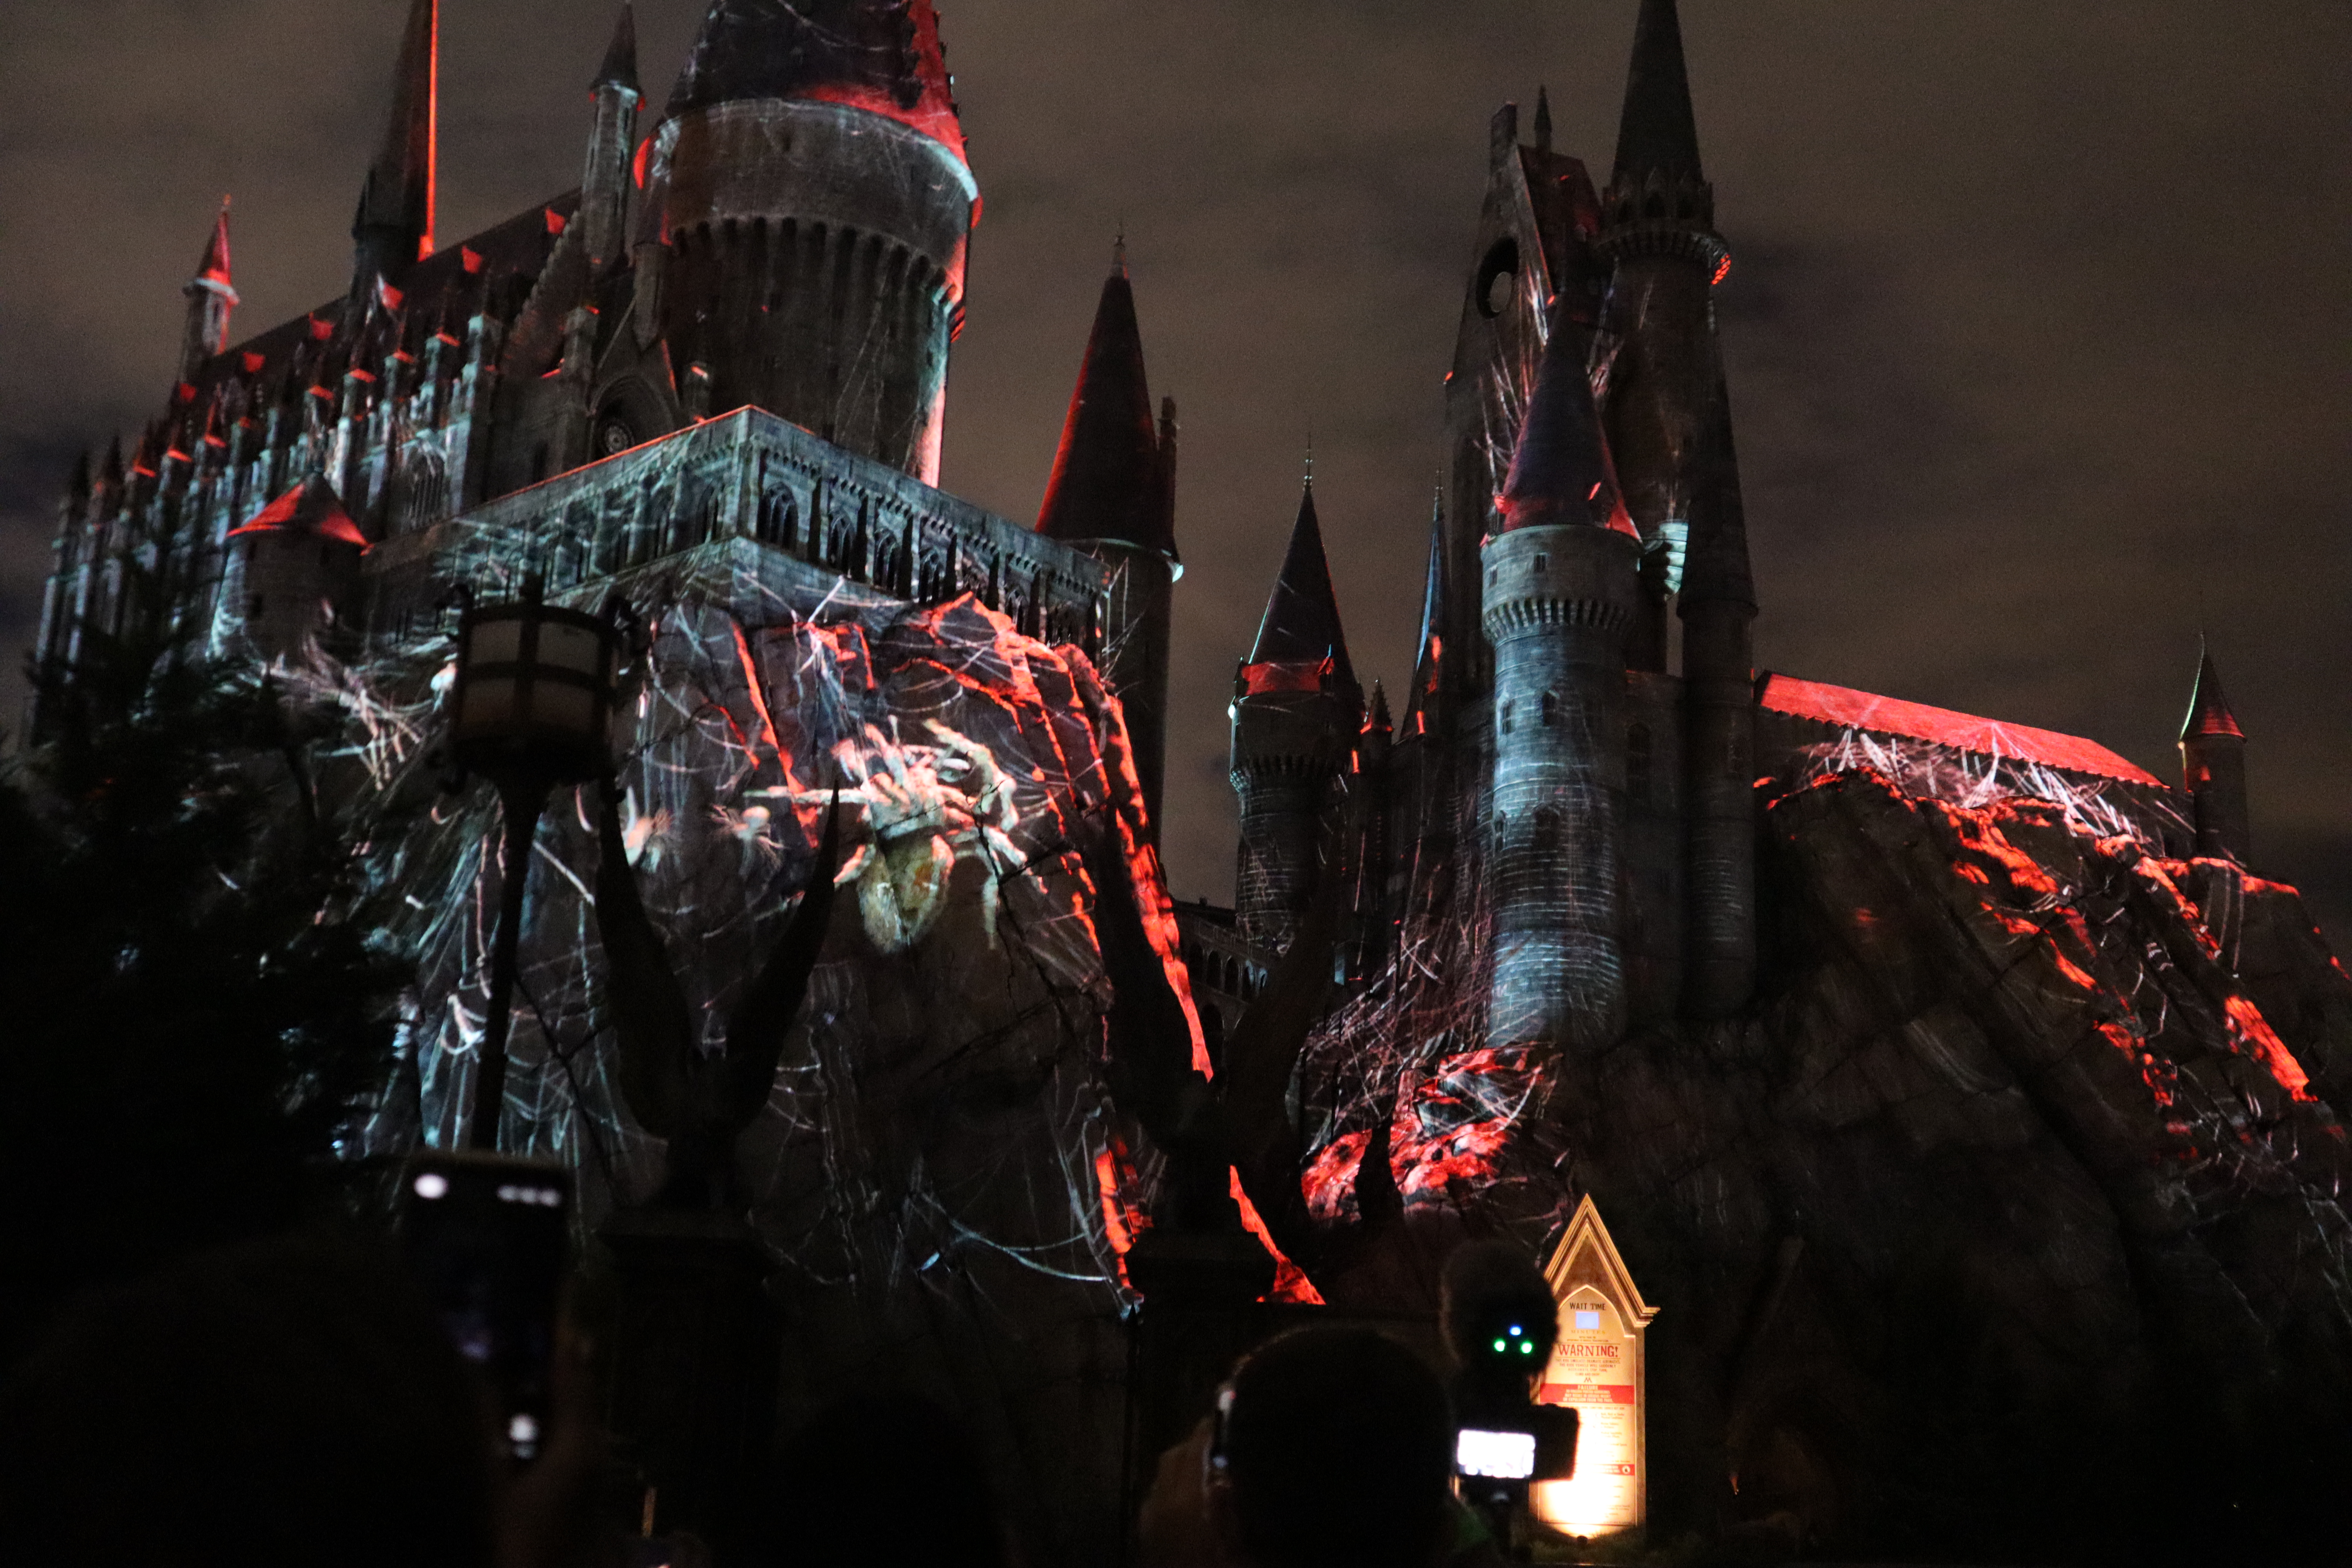 Giant Acromantulas cover the entire castle in “Dark Arts at Hogwarts Castle.”